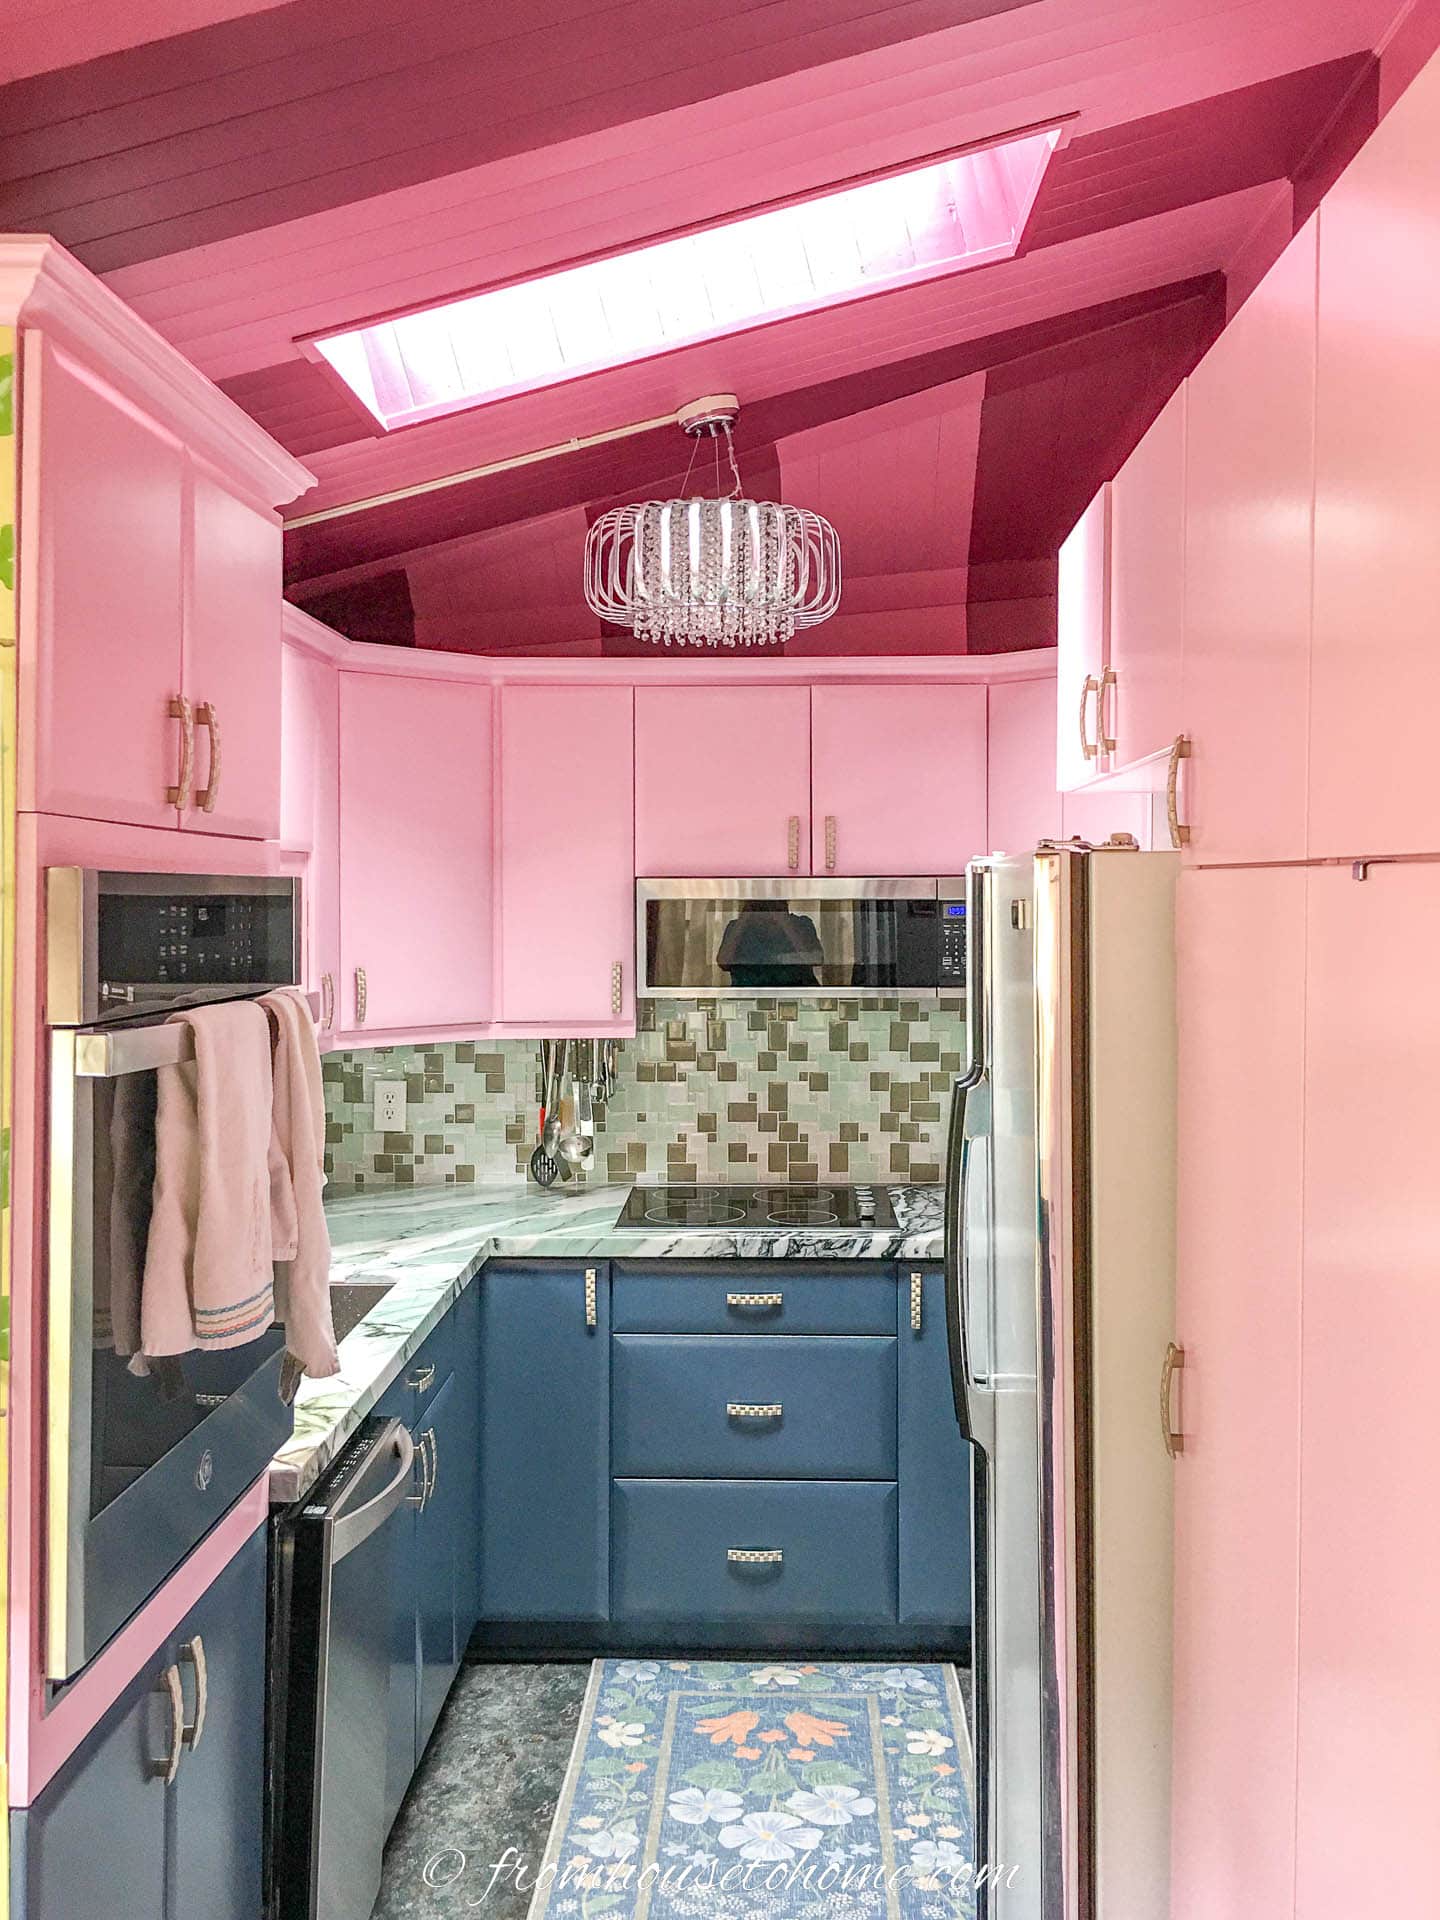 Kitchen with two-toned pink ceiling, pink upper cabinets, light teal backsplash and countertop, and dark teal lower cabinets and floor